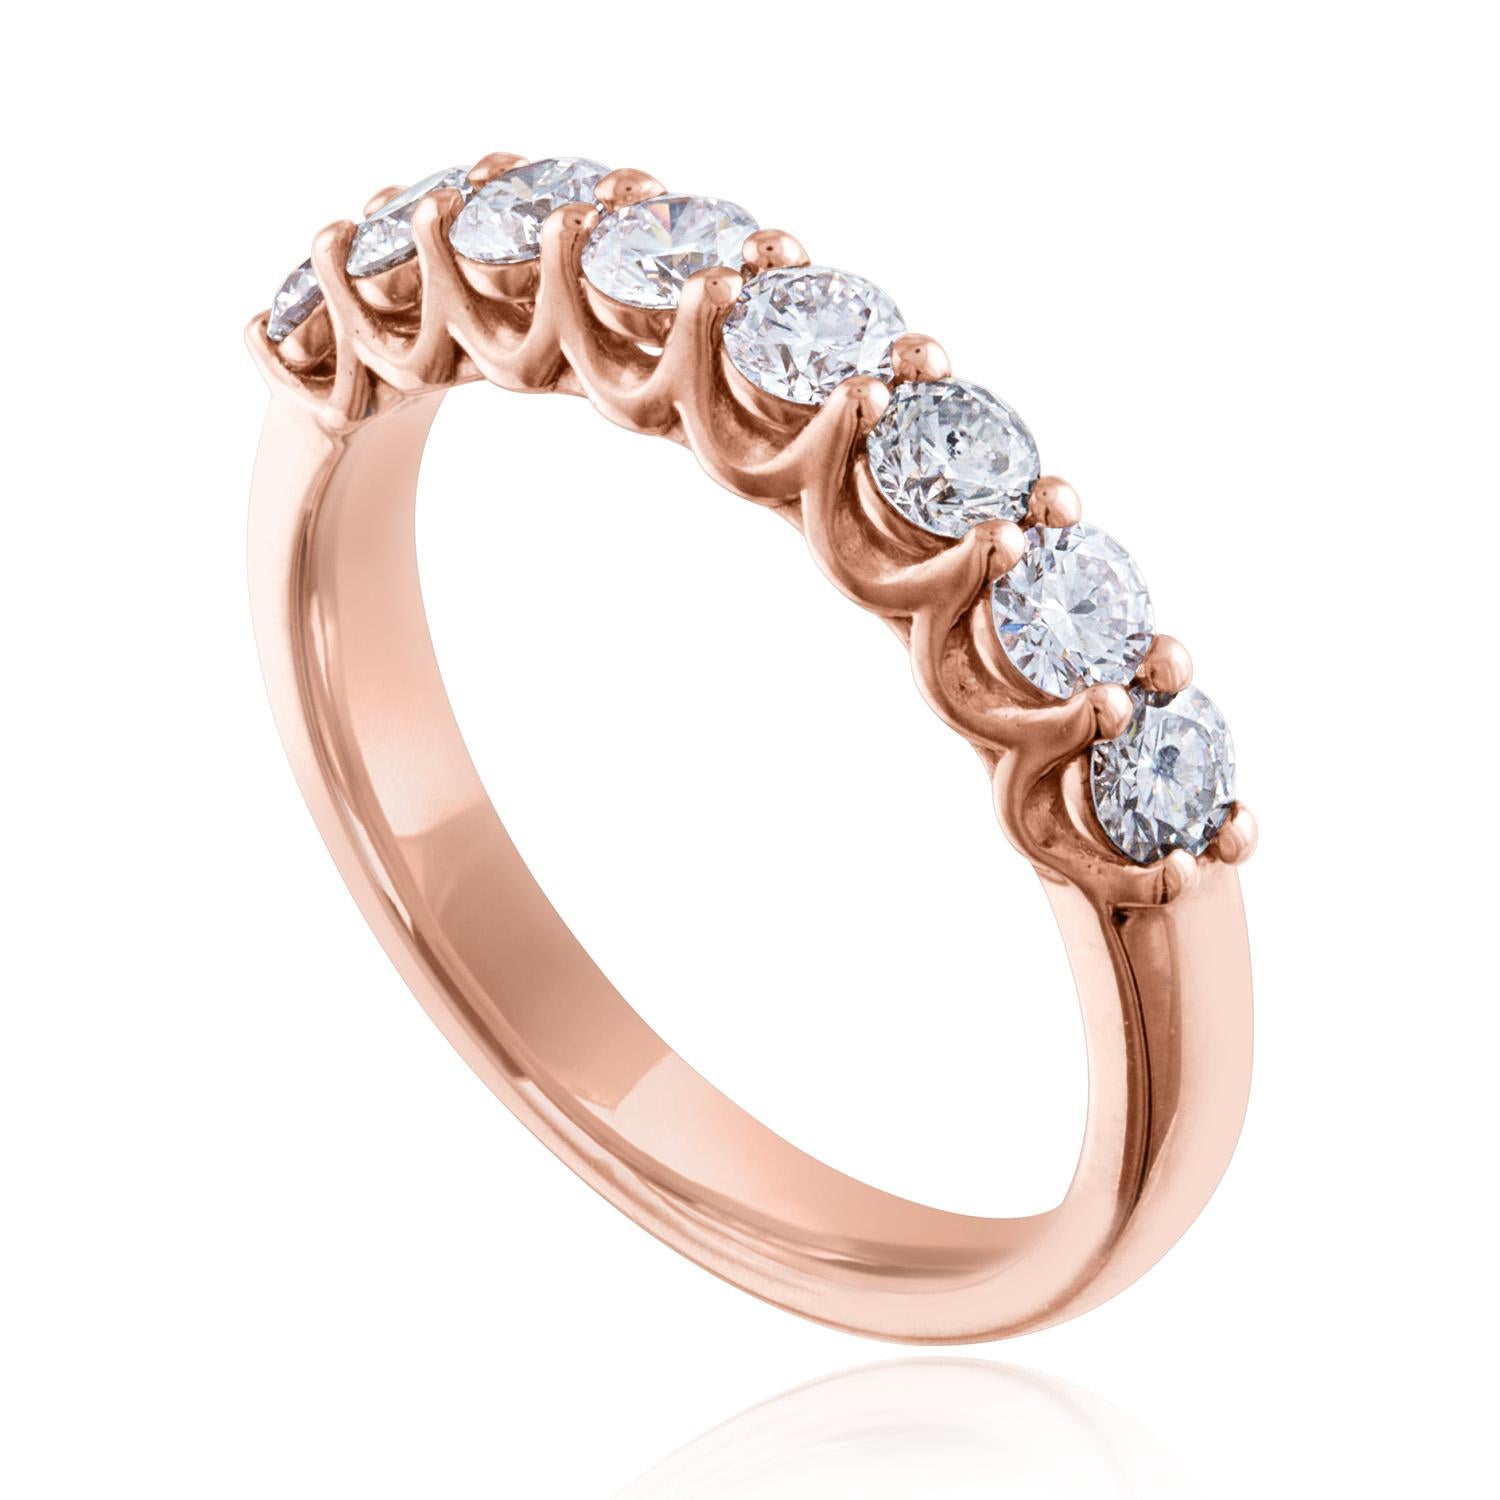 Very Beautiful Half Diamond Band Ring
The ring is 14K Rose Gold
There are 8 Round Cut Diamonds prong set
There are 0.80 Carats In Diamonds G SI2/I1
The ring is a size 6.5, sizable.
The ring weighs 3.2 grams.